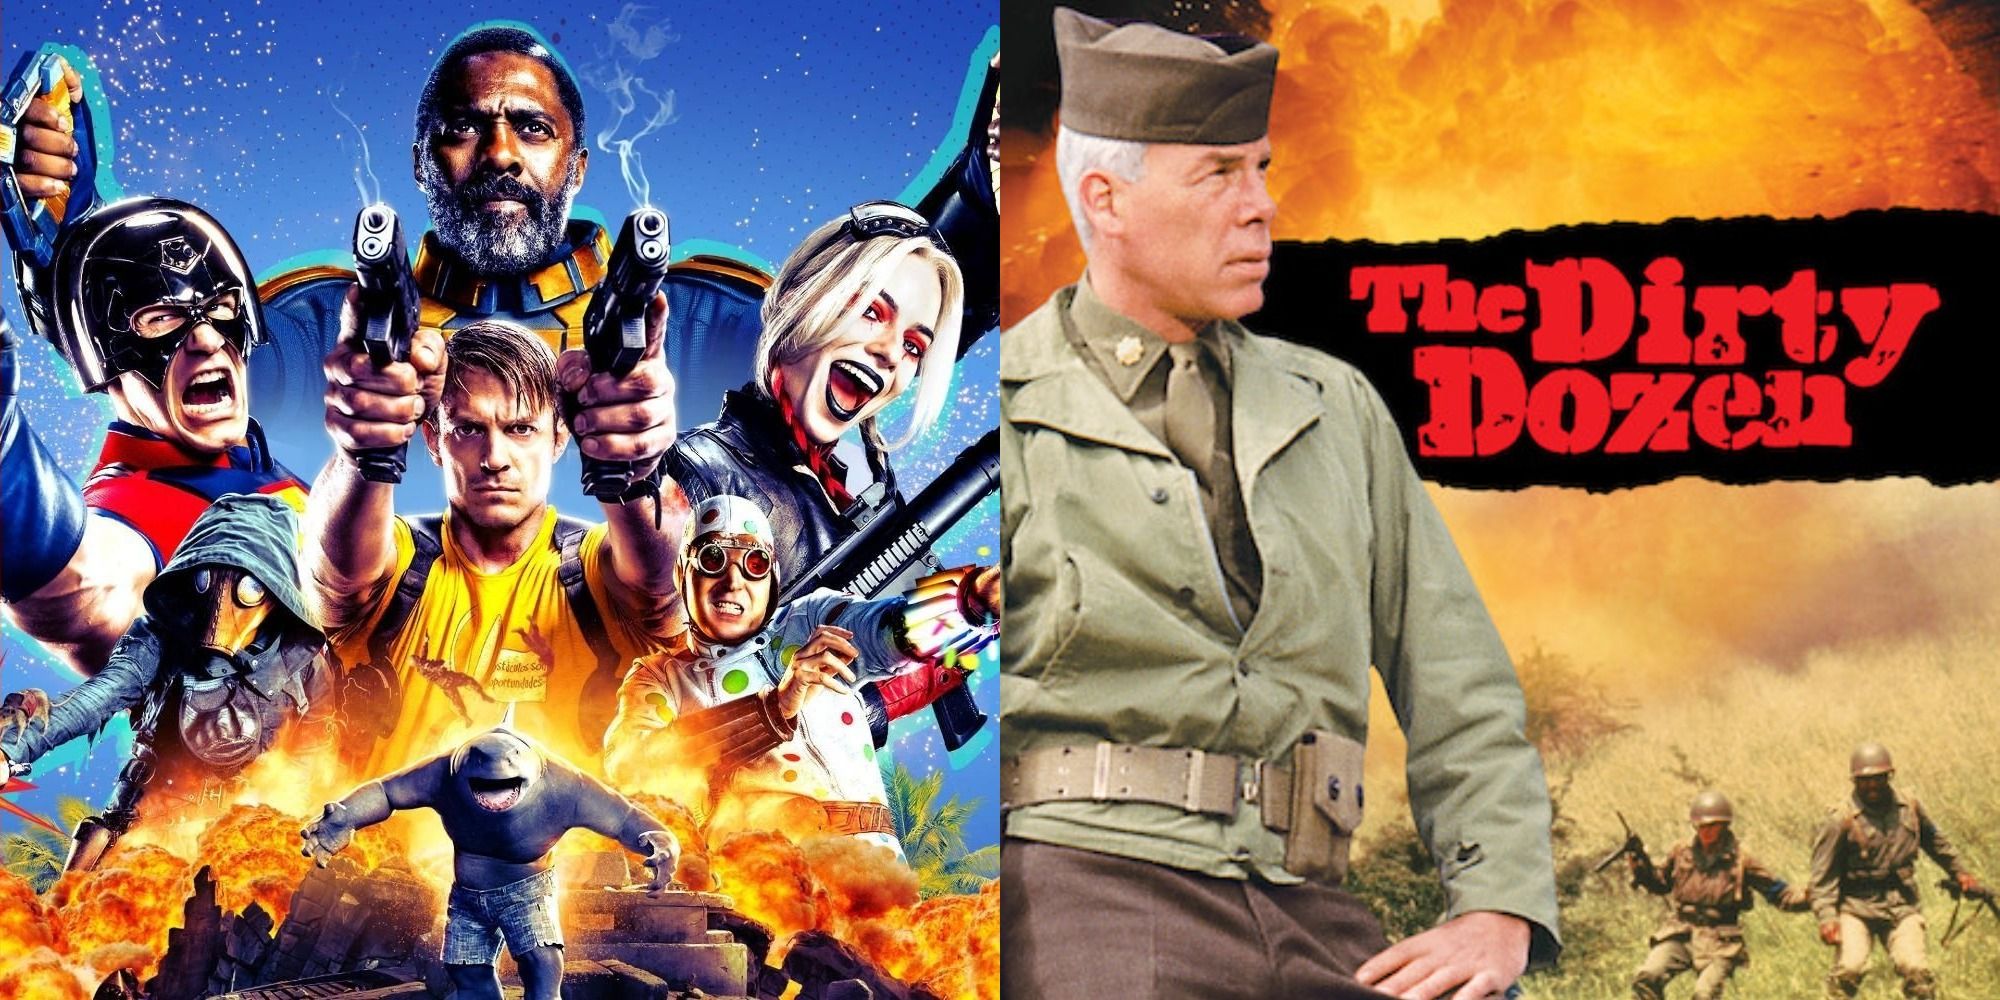 Split image showing the cast of The Suicide Squad and the poster for The Dirty Dozen